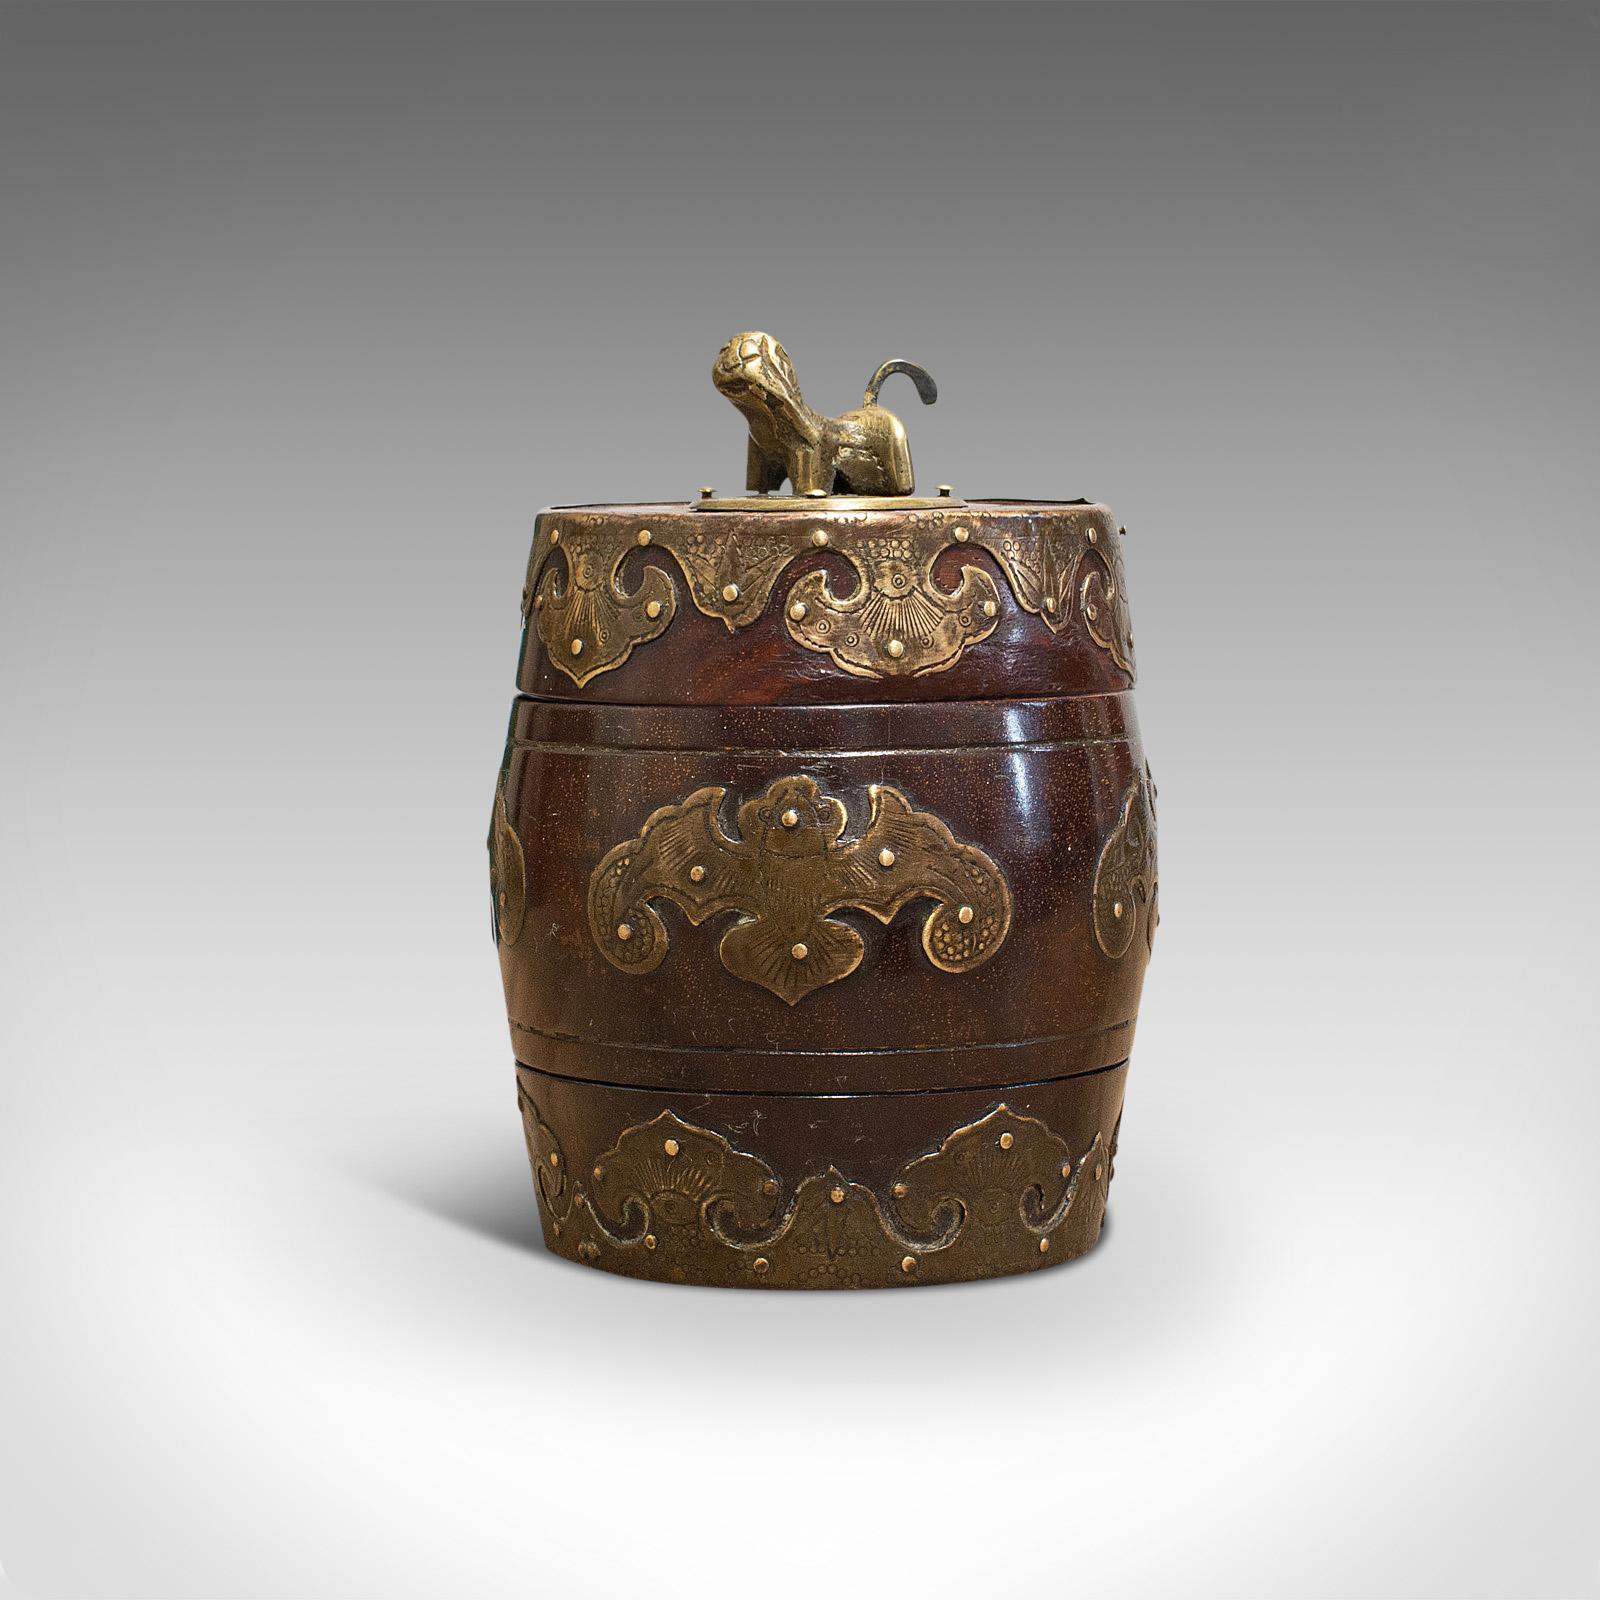 This is a small antique spice jar. A Chinese, mahogany and brass decorative pot, dating to the late Victorian period, circa 1890.

Striking, late 19th century oriental taste
Displays a desirable aged patina
Mahogany shows fine grain detail and